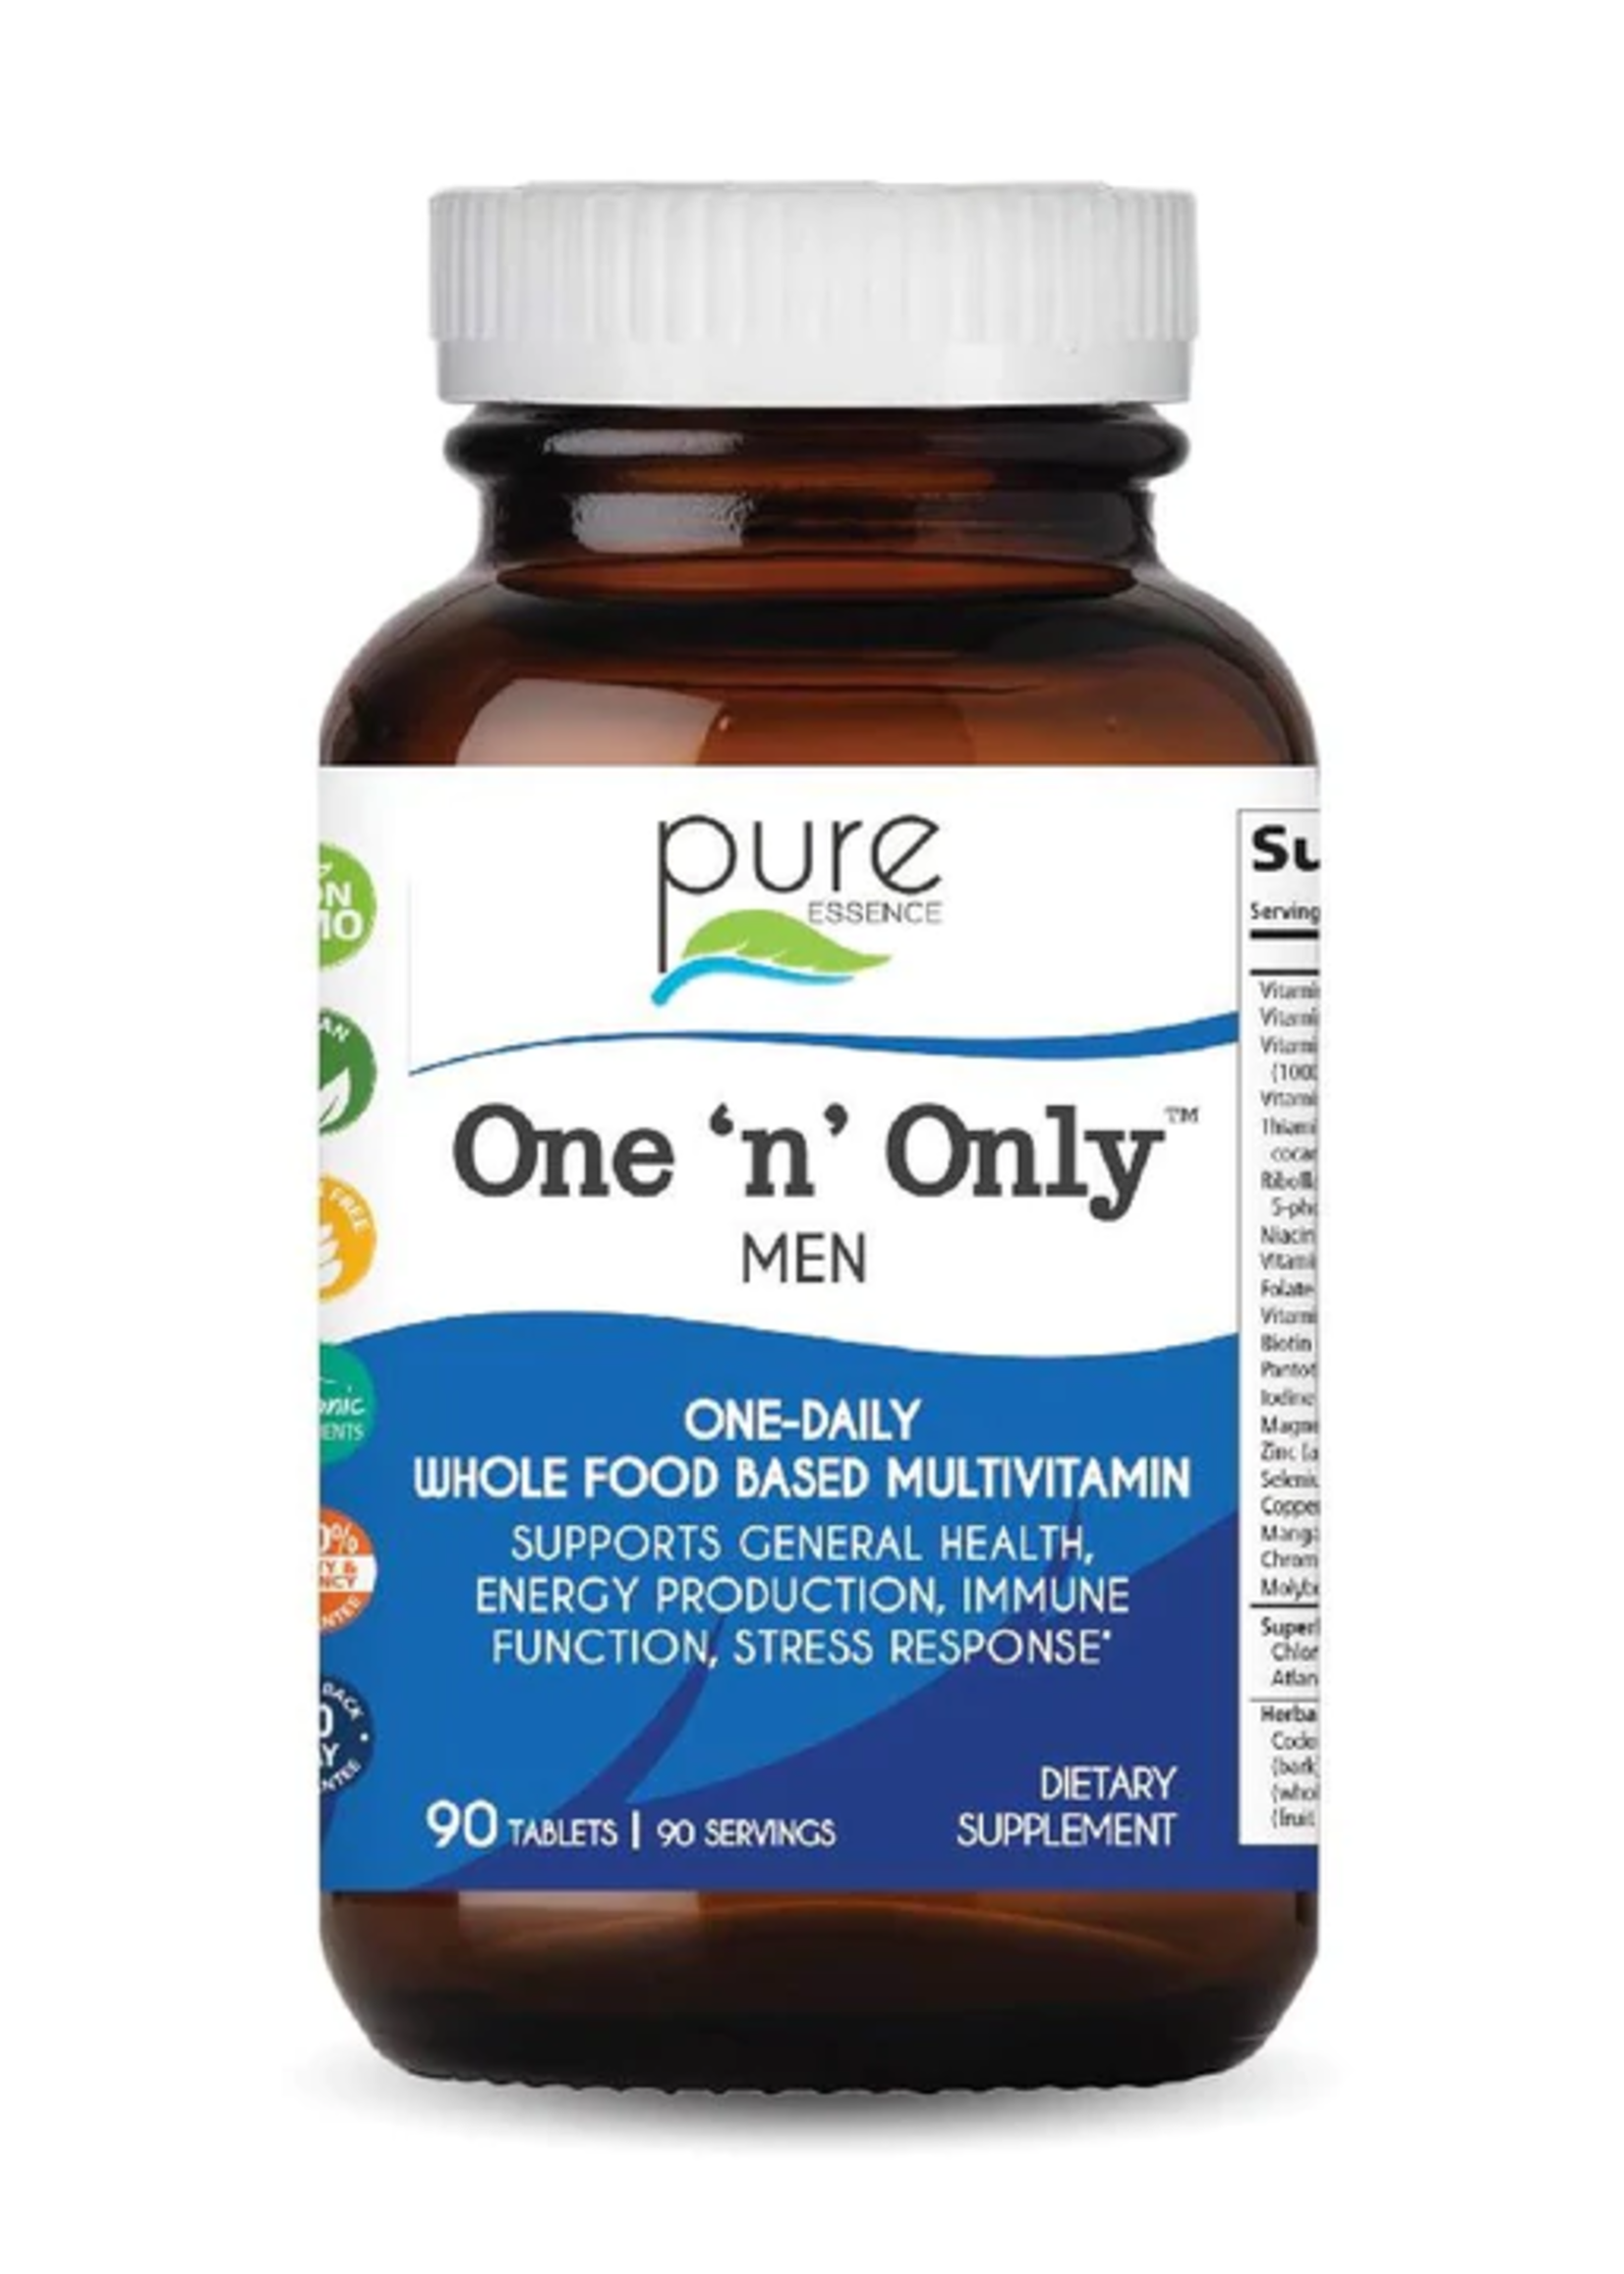 Pure Essence One N Only Men 90ct